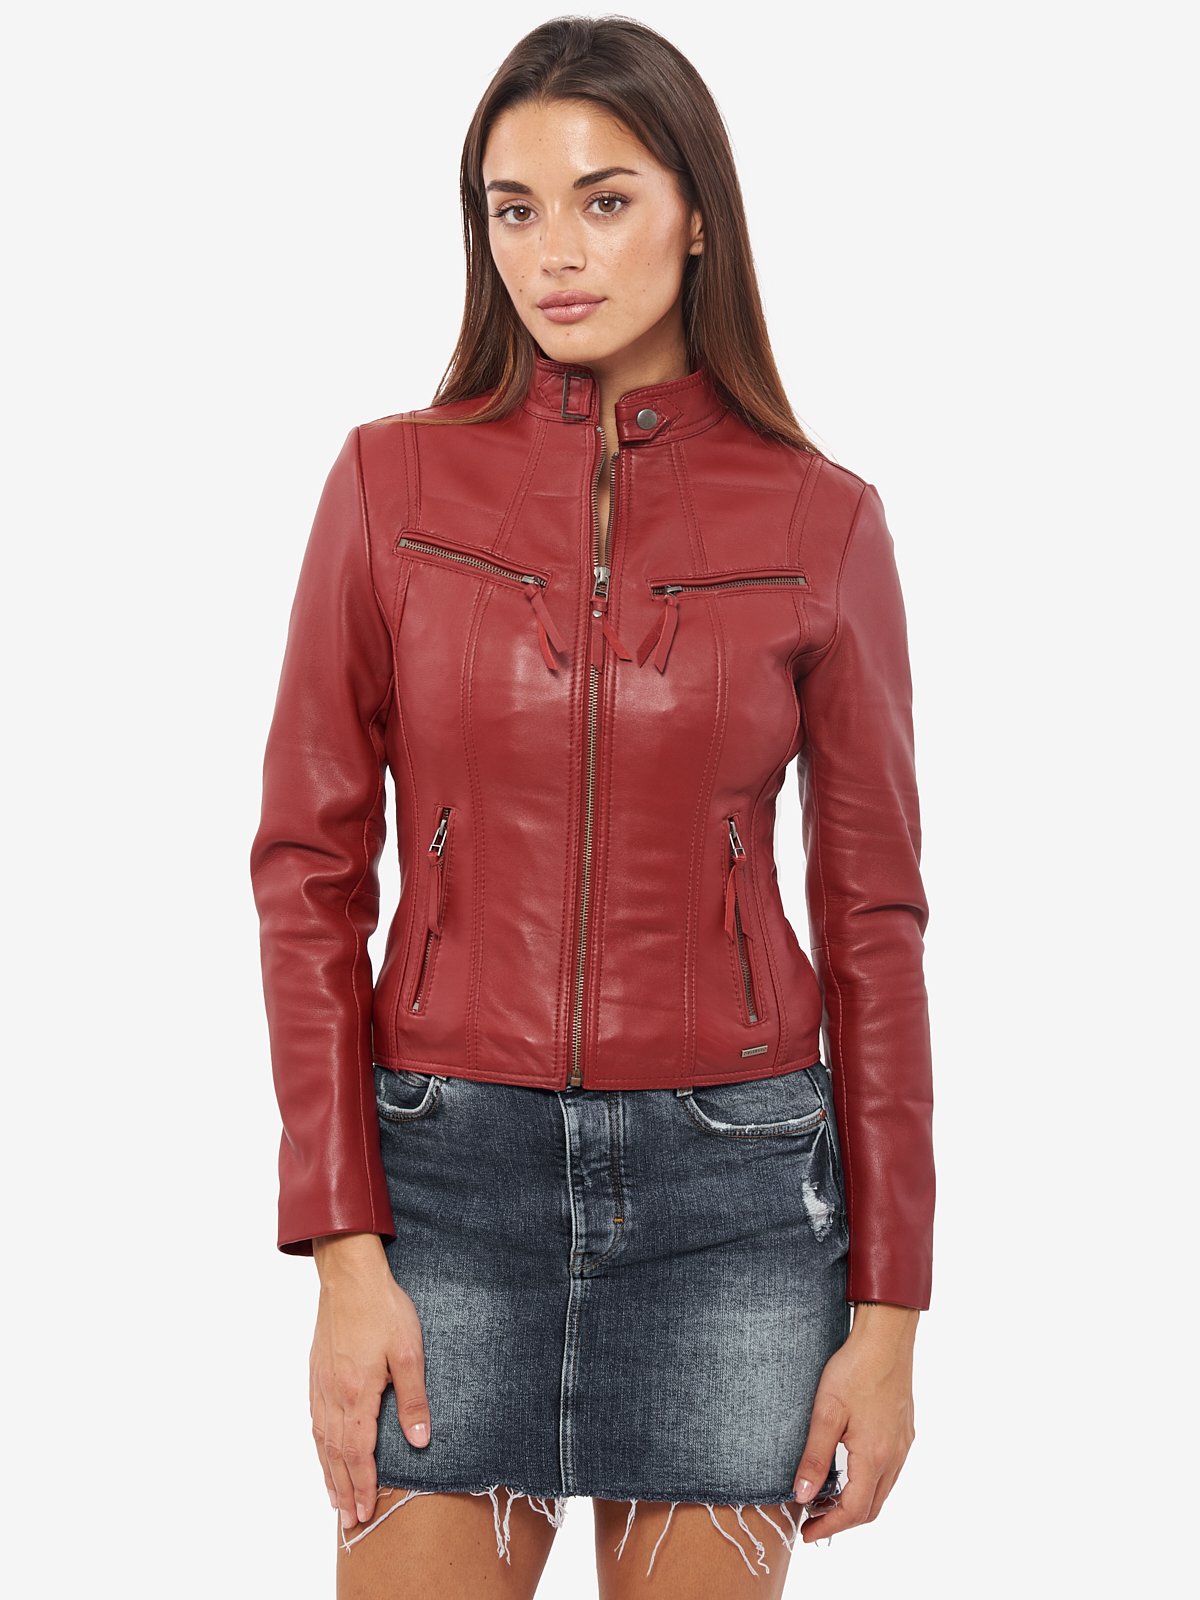 Women Body Fit Bomber KARIOX F-L 41 Leather Jacket